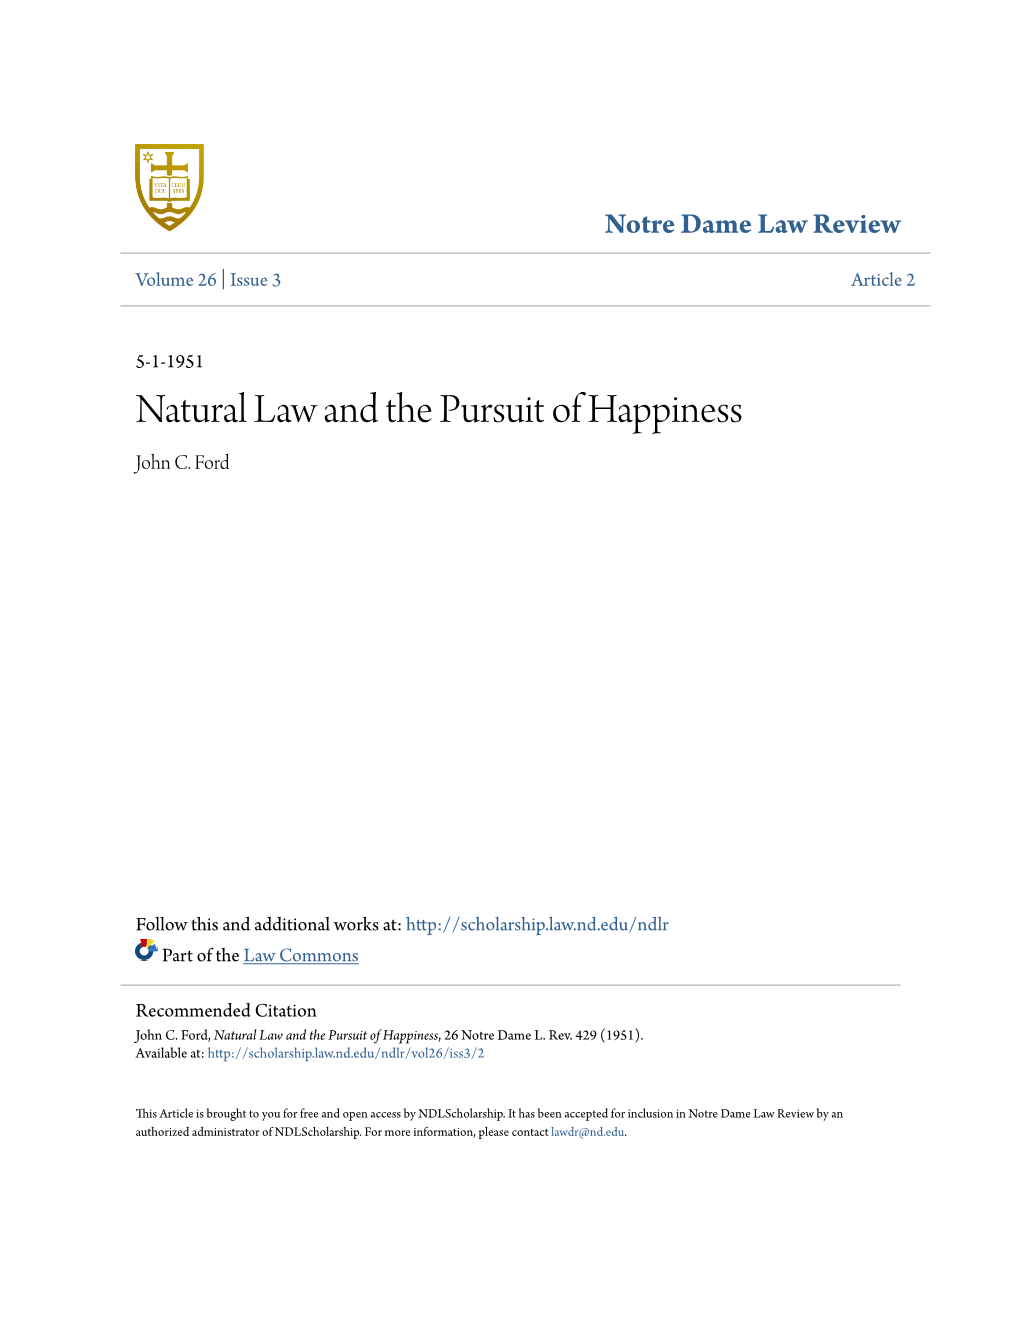 Natural Law and the Pursuit of Happiness John C